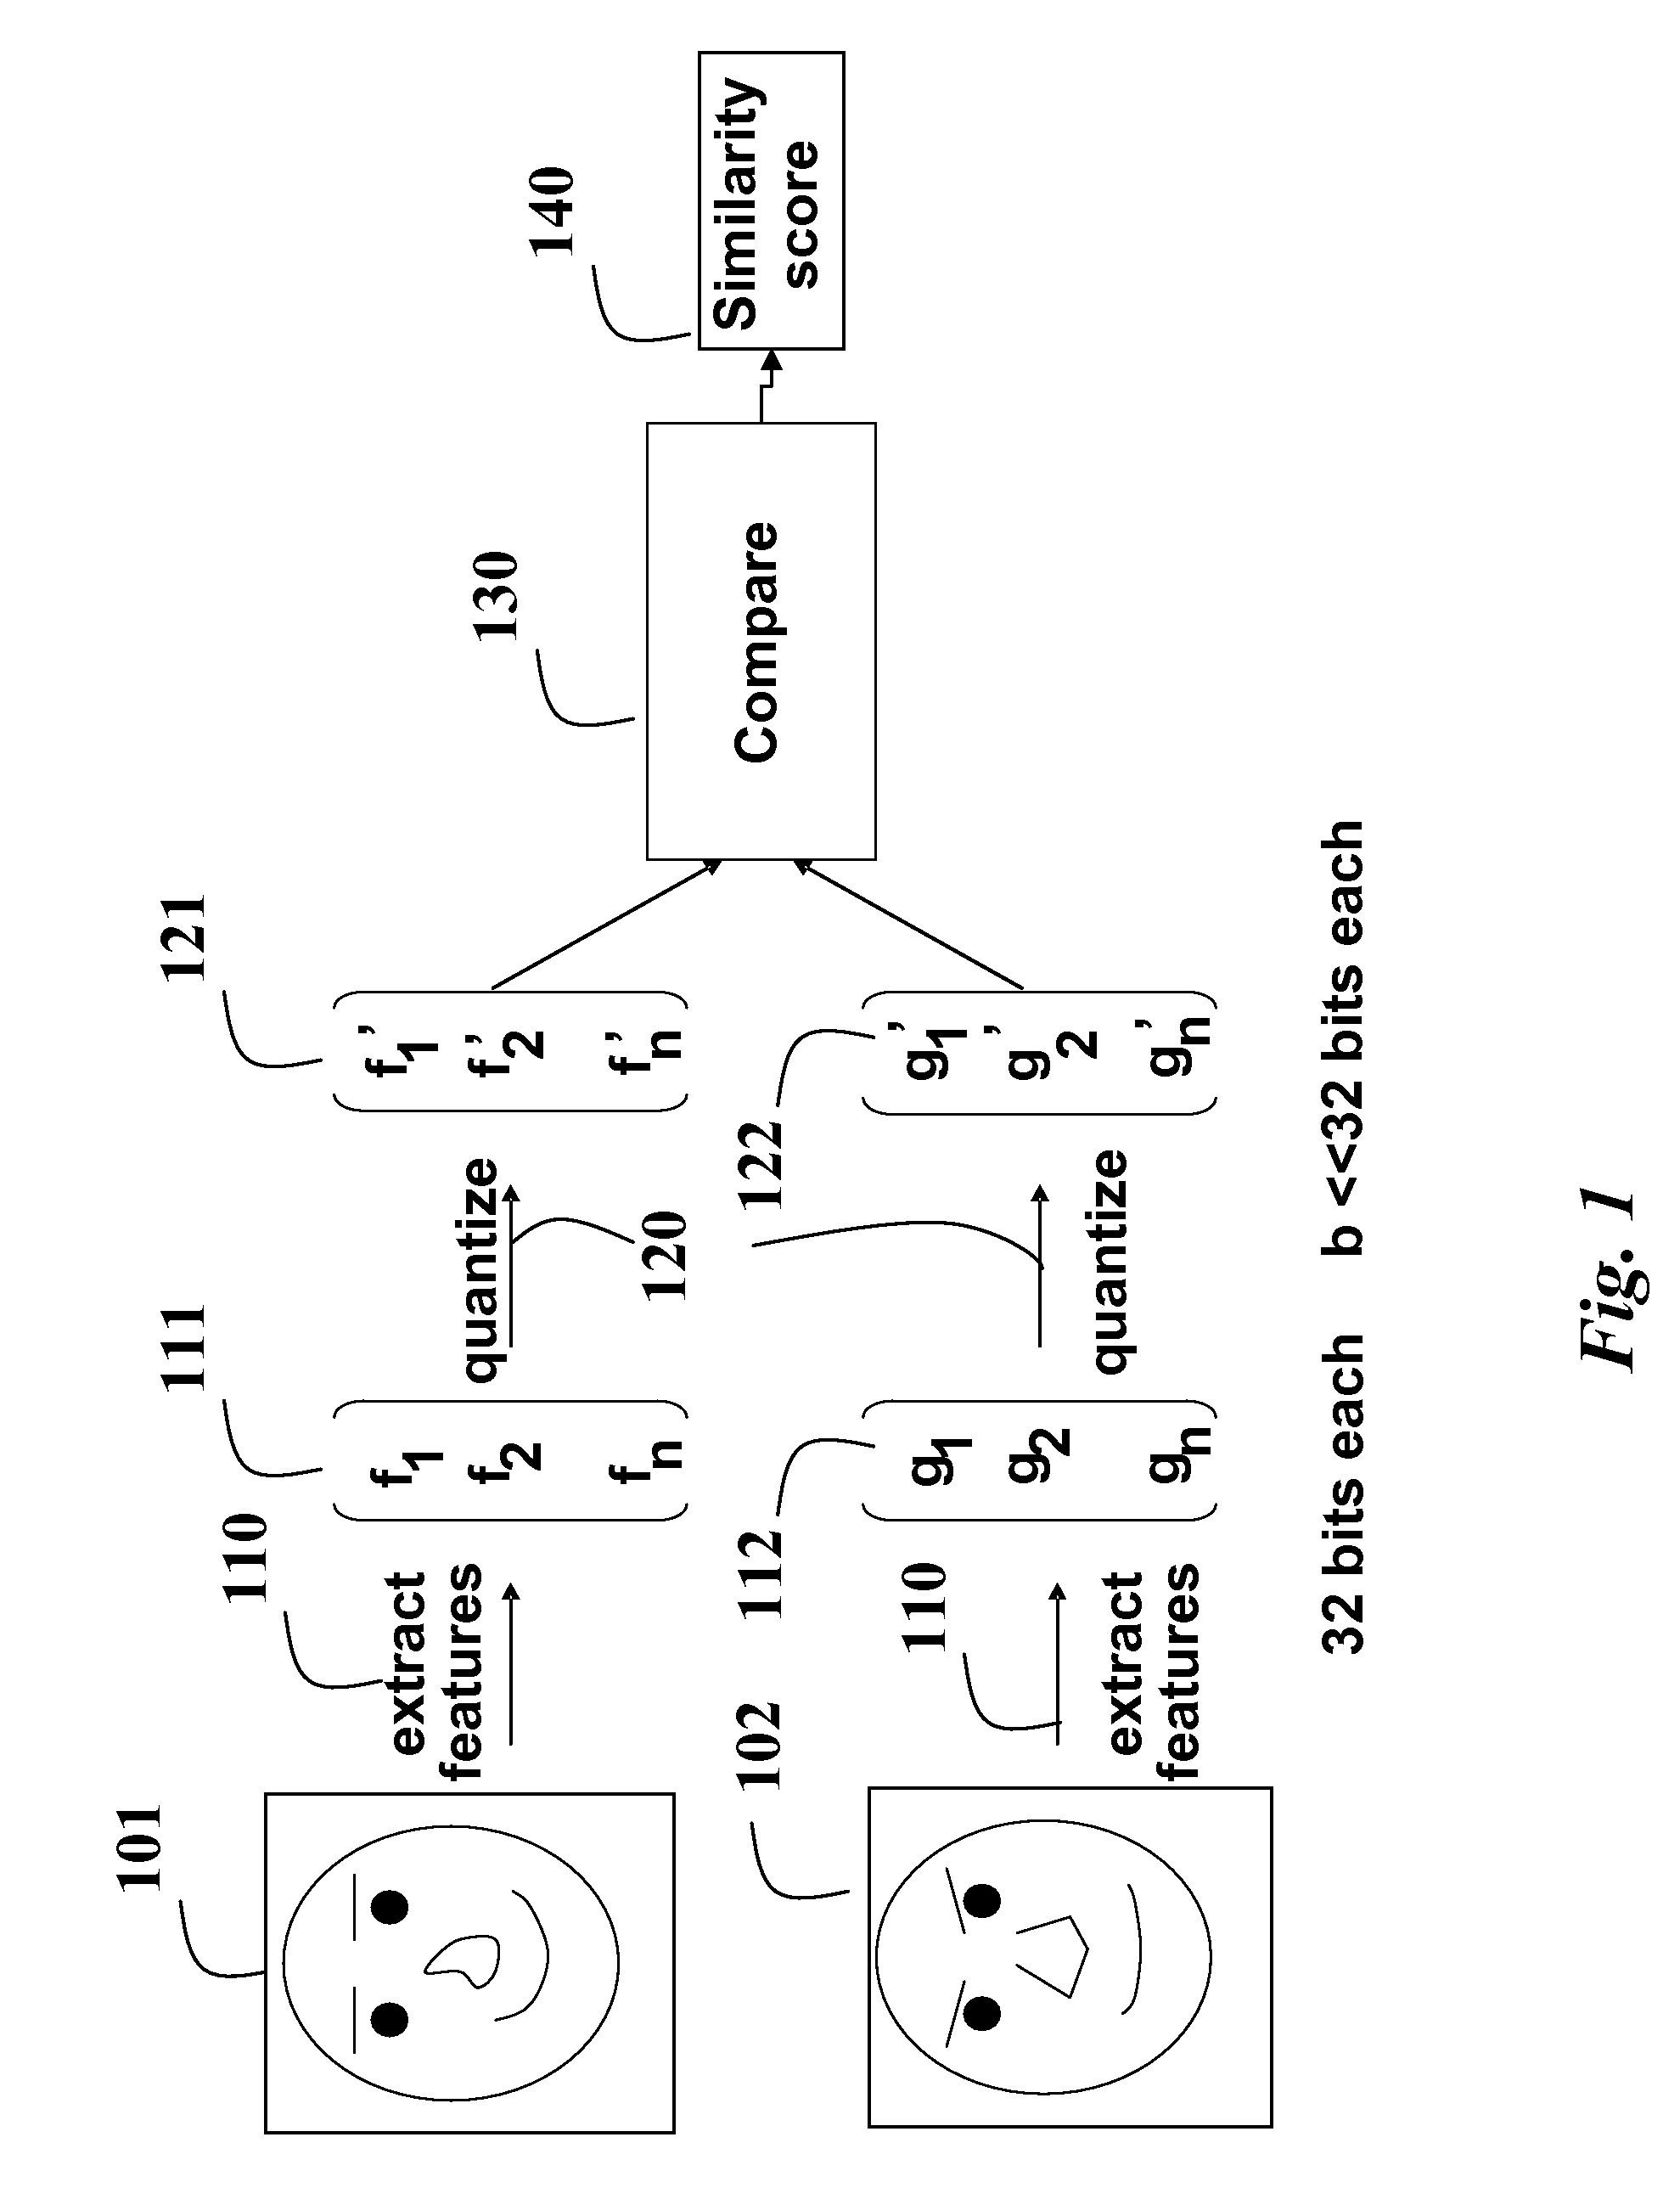 Method for Identifying Faces in Images with Improved Accuracy Using Compressed Feature Vectors